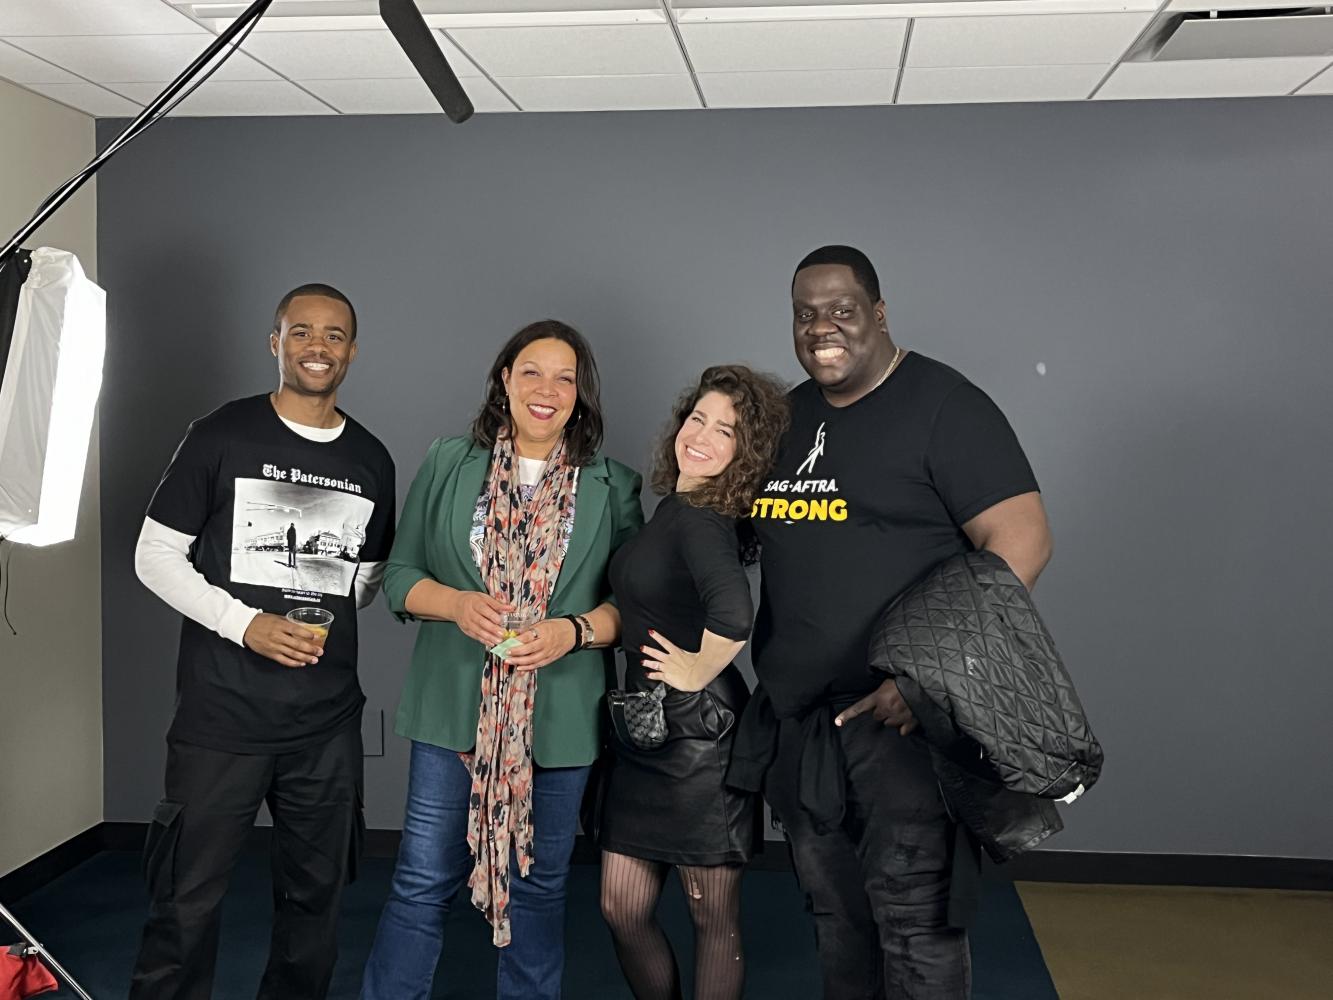 Four individuals, two African American men, Powell (Black) and Seeds stand in a large room. Powell, center left, wears a green top, colorful scarf and jeans; Seeds wears an all-black outfit. Seeds poses with her hand on her hip.